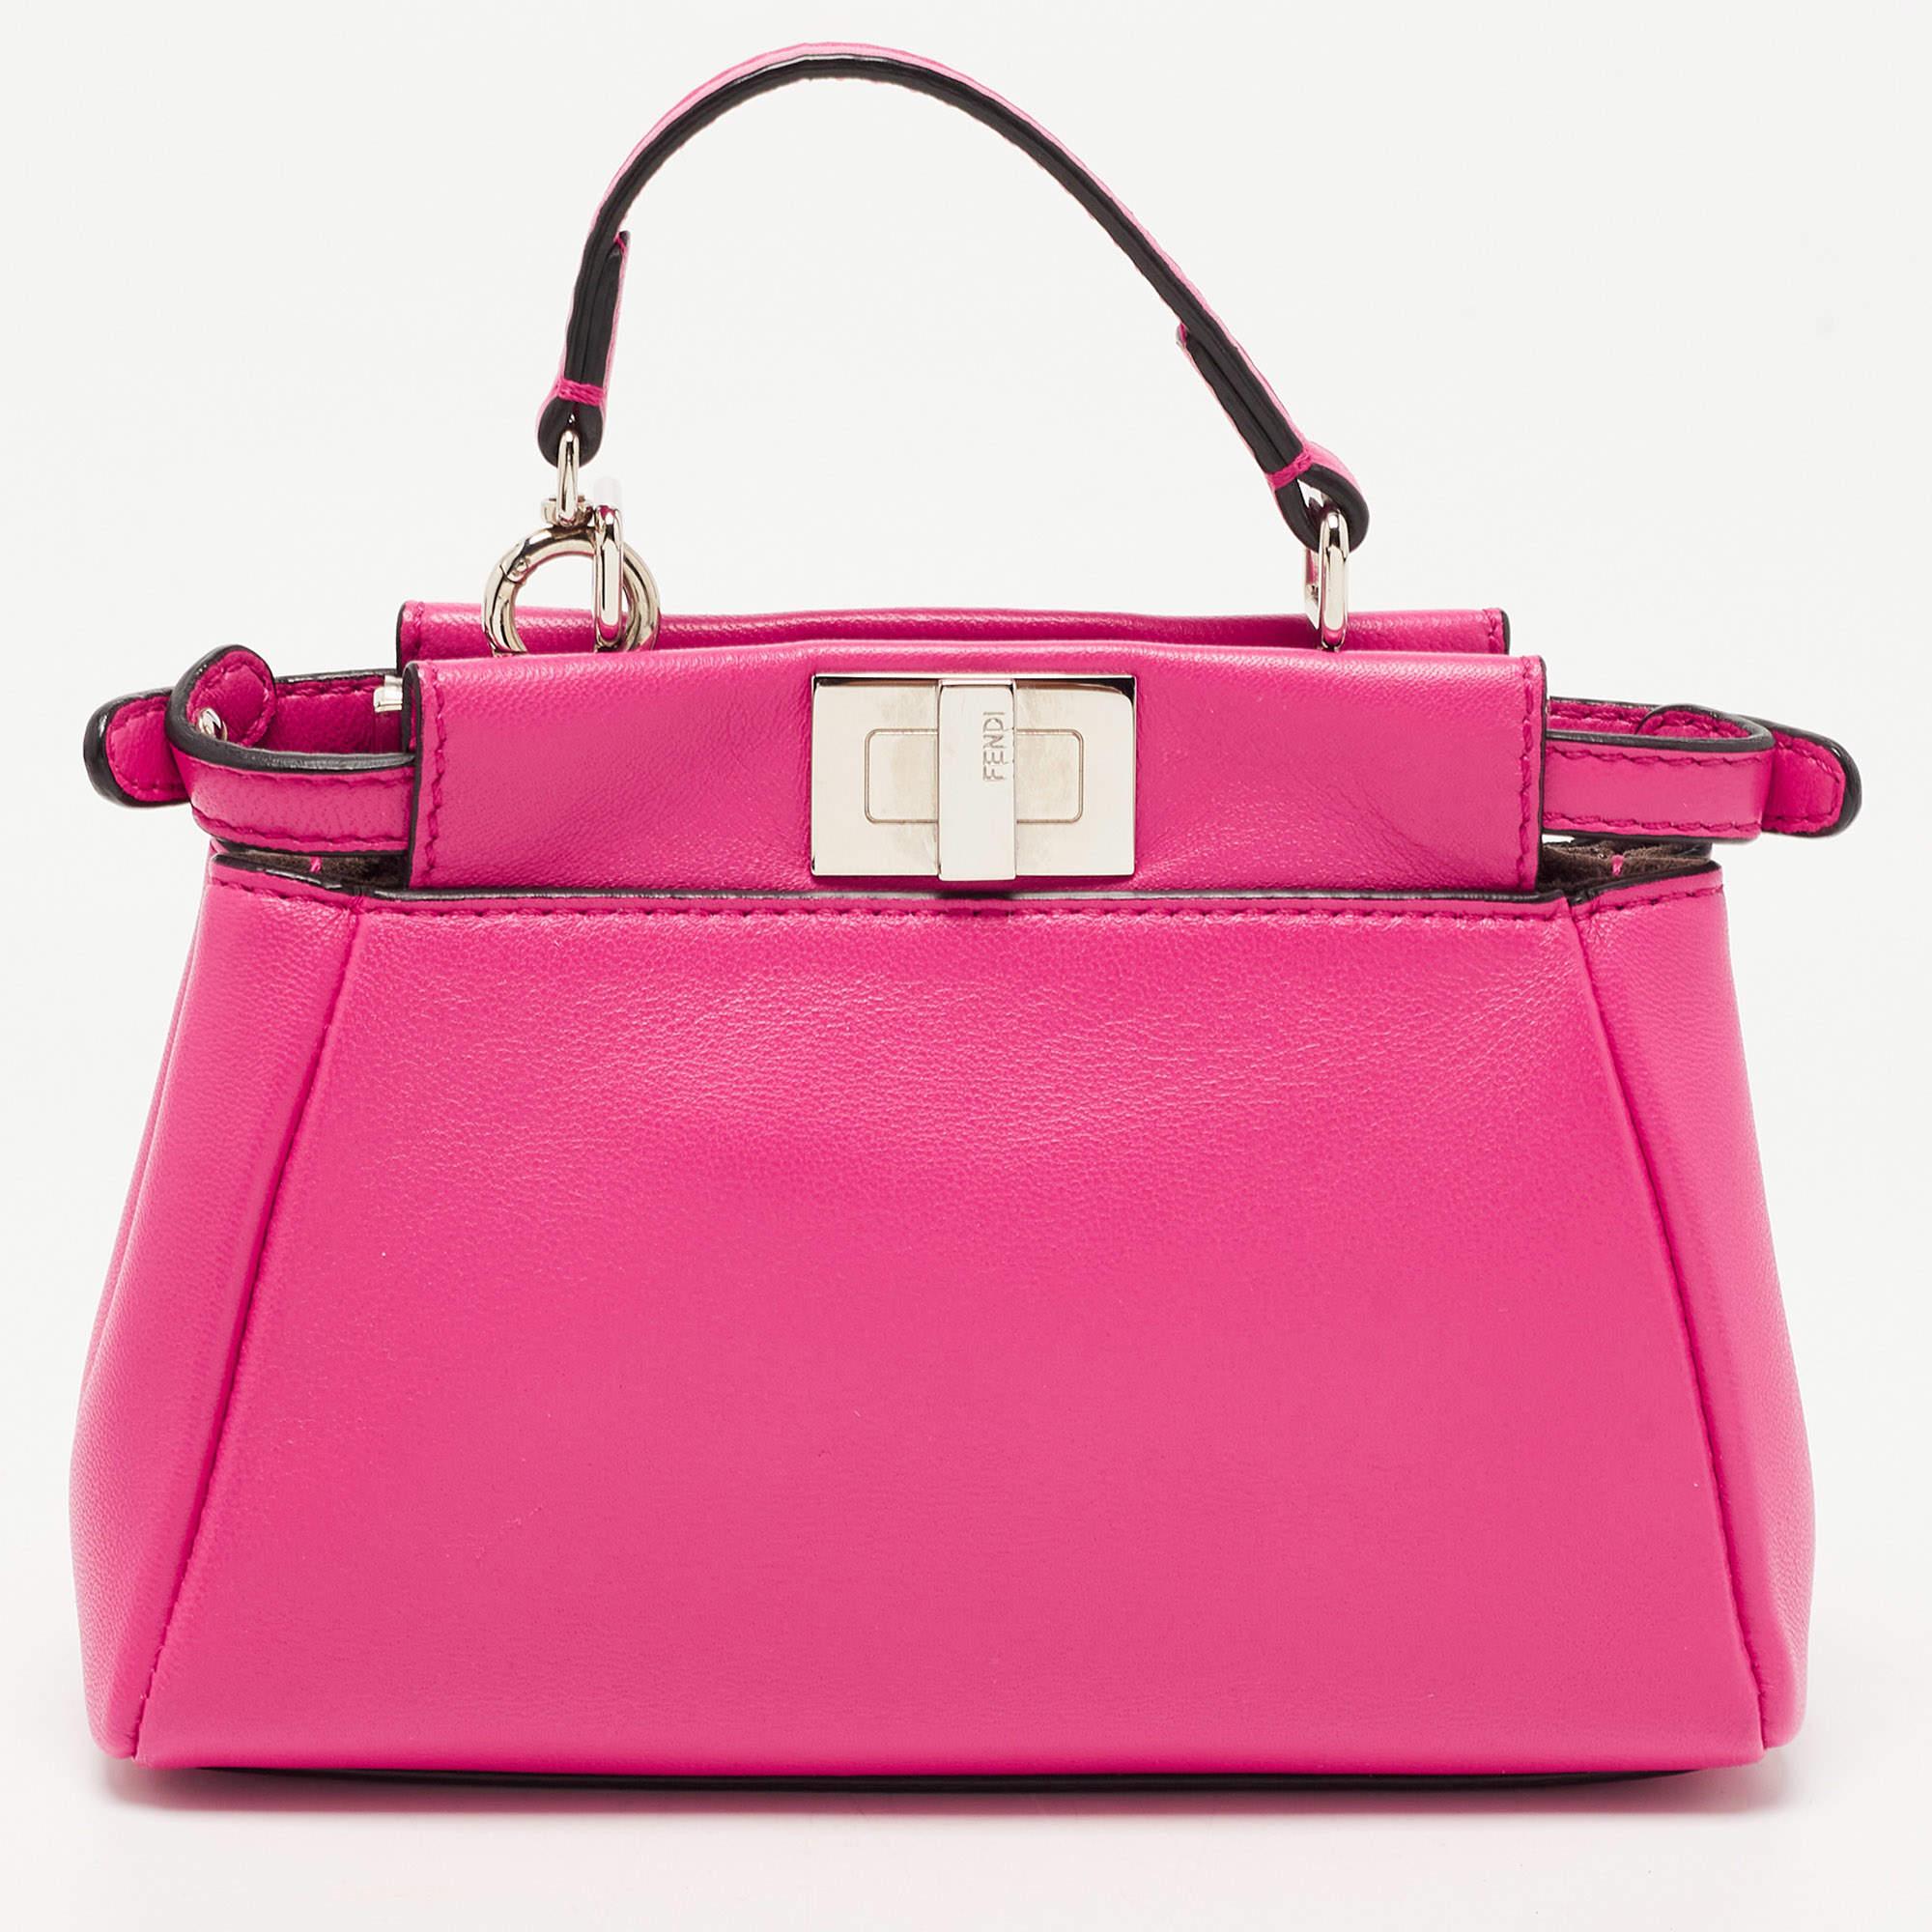 This sized-down version of the iconic Fendi Peekaboo will be a delight to carry. It is sewn using fuchsia leather and paired with gold-tone hardware. It may not house much, but it will surely advance your style!

Includes: Detachable Strap